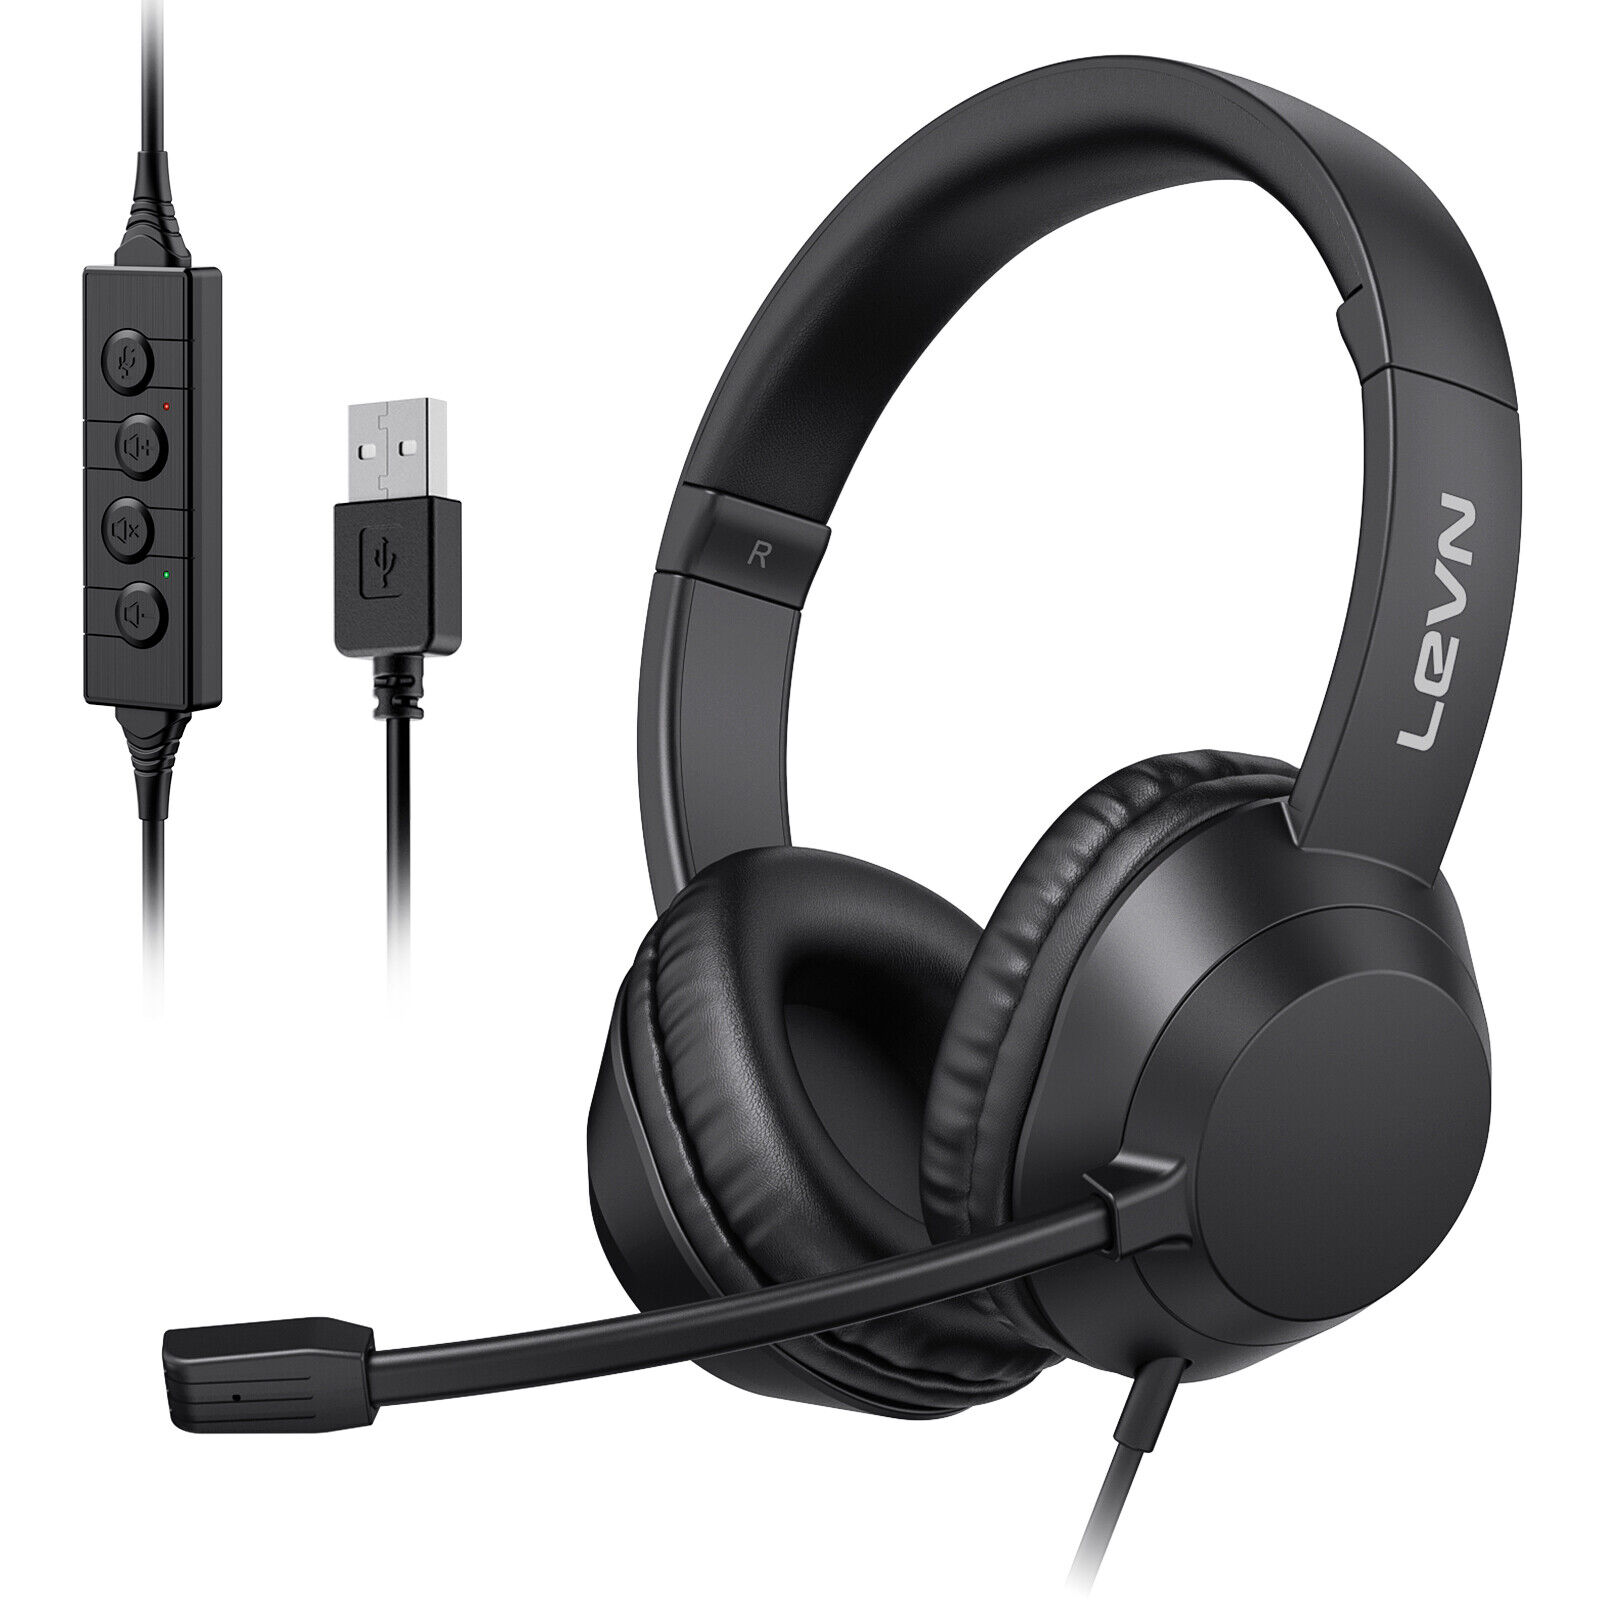 LEVN USB Wired Headset For PC With Microphone Noise Cancelling & Audio Controls